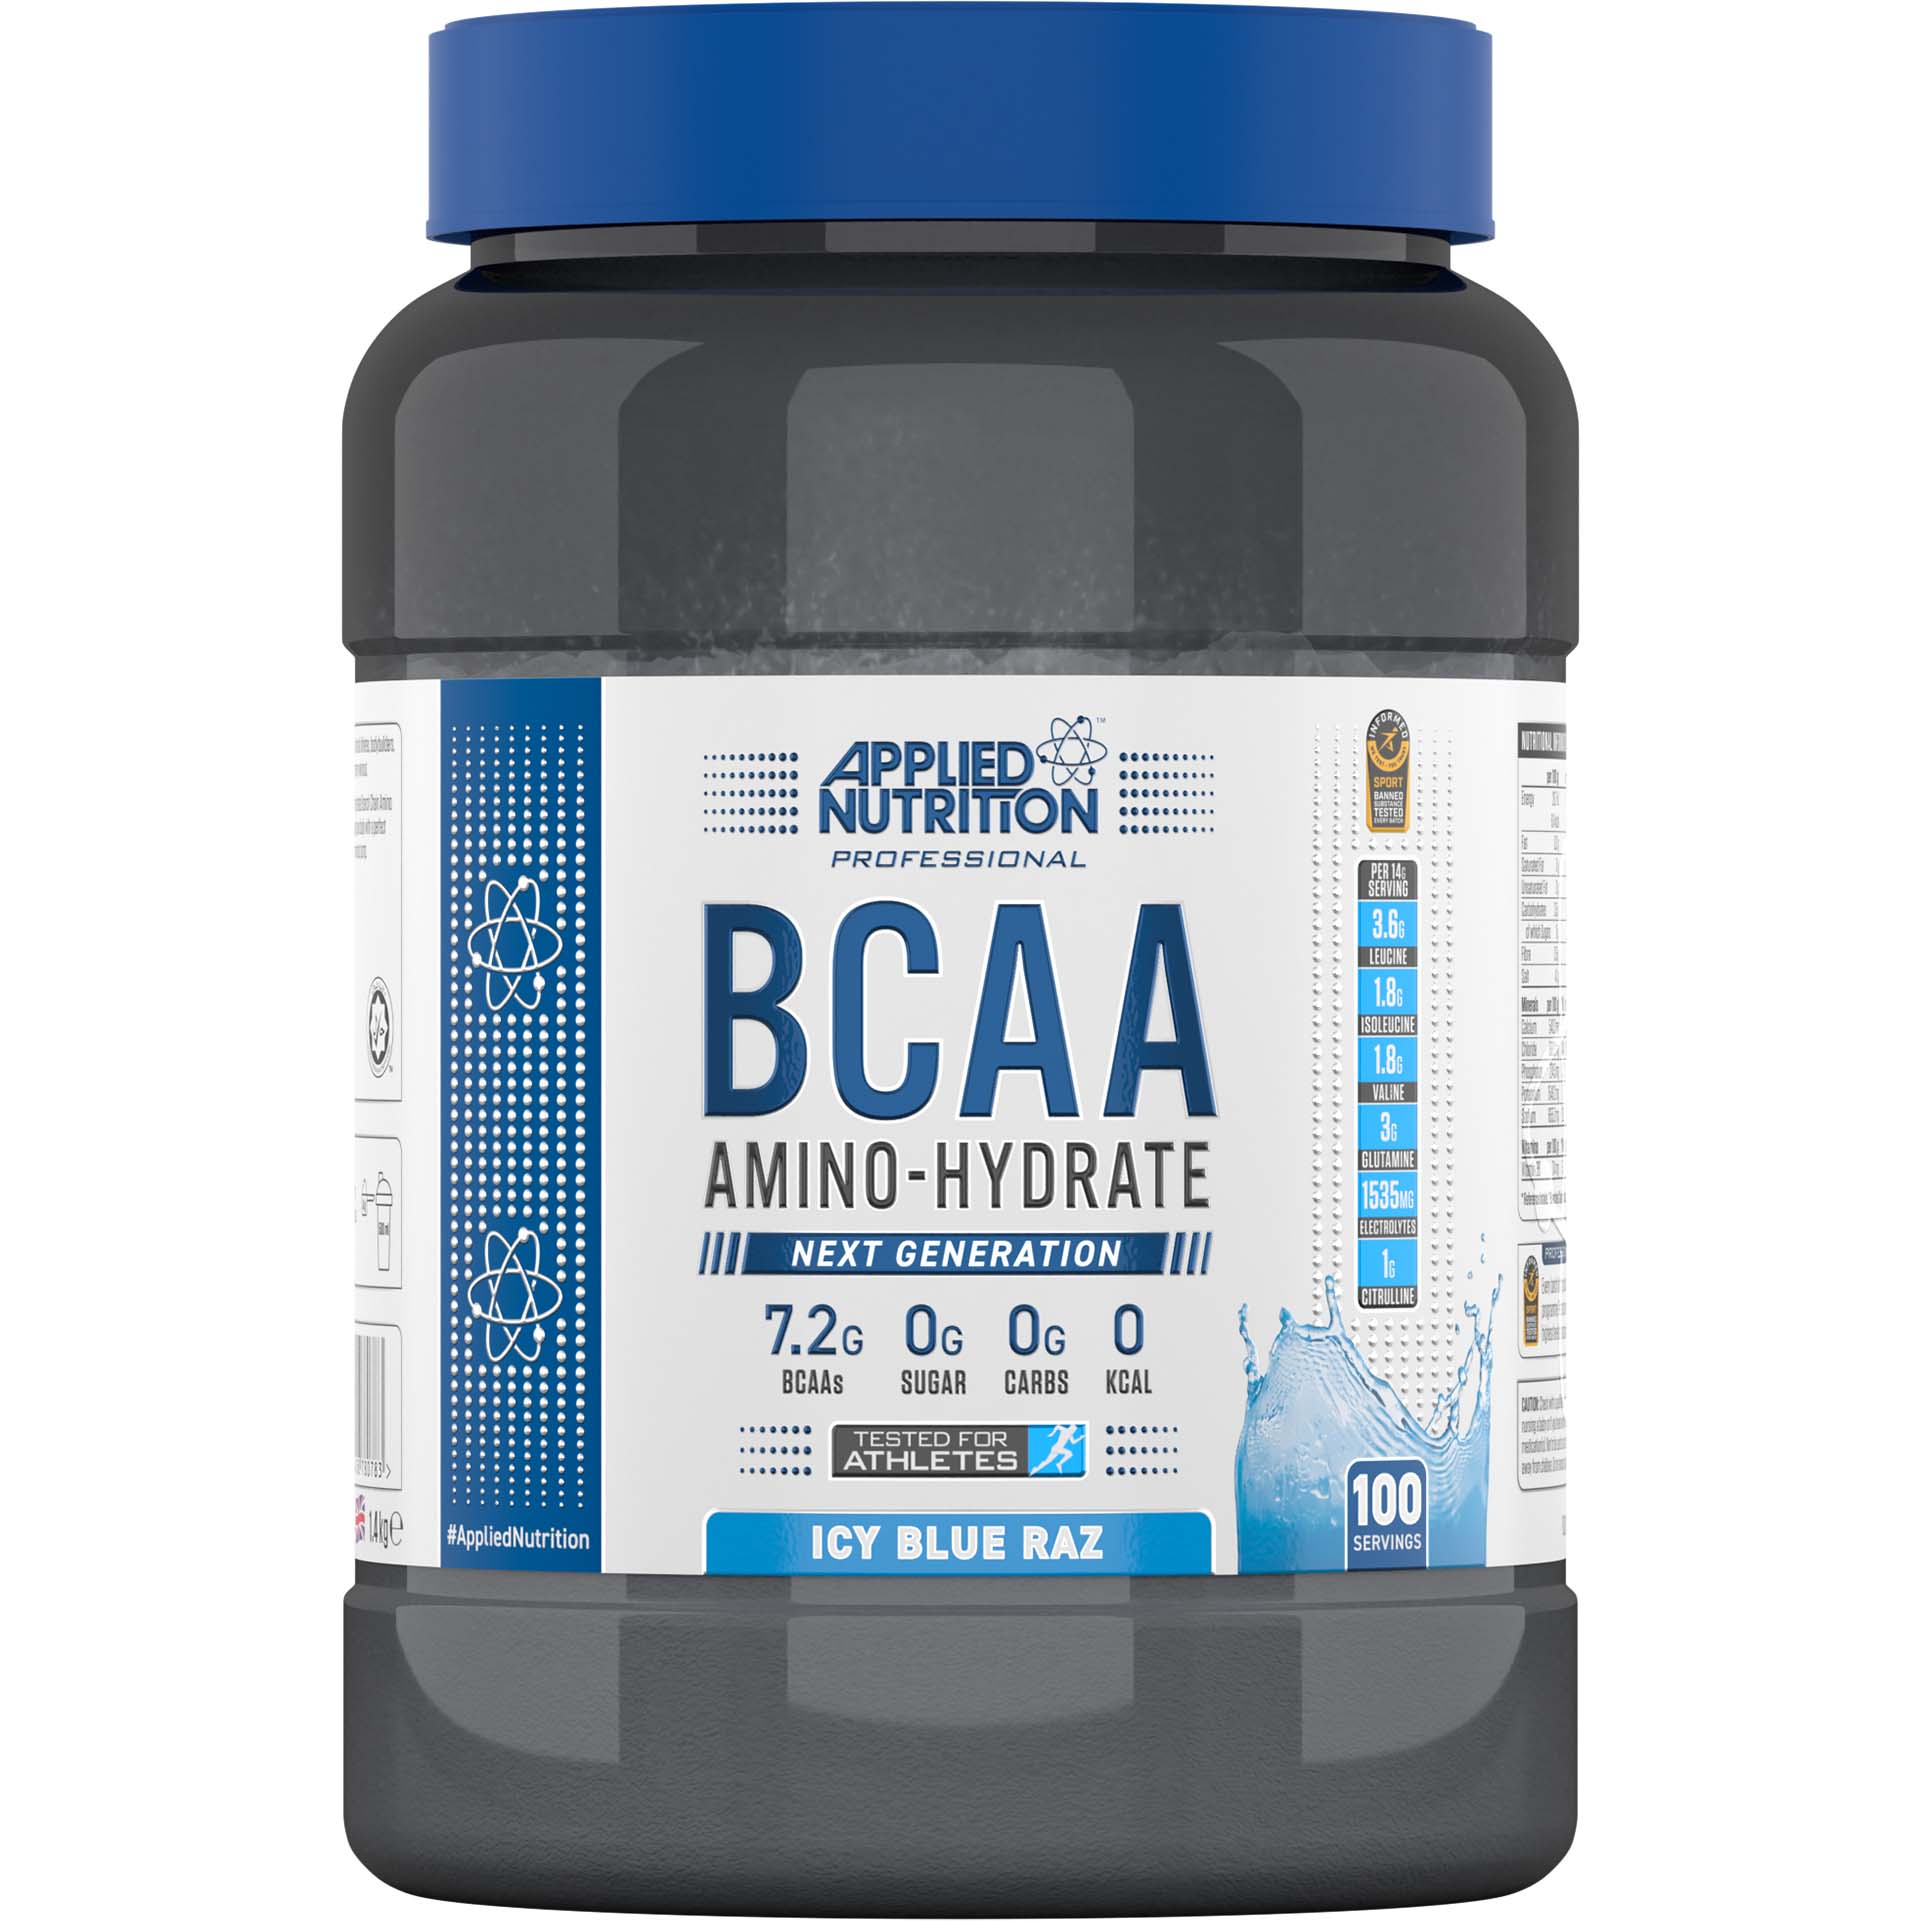 Applied Nutrition BCAA Amino Hydrate 100 Serving Icy Blue Raz